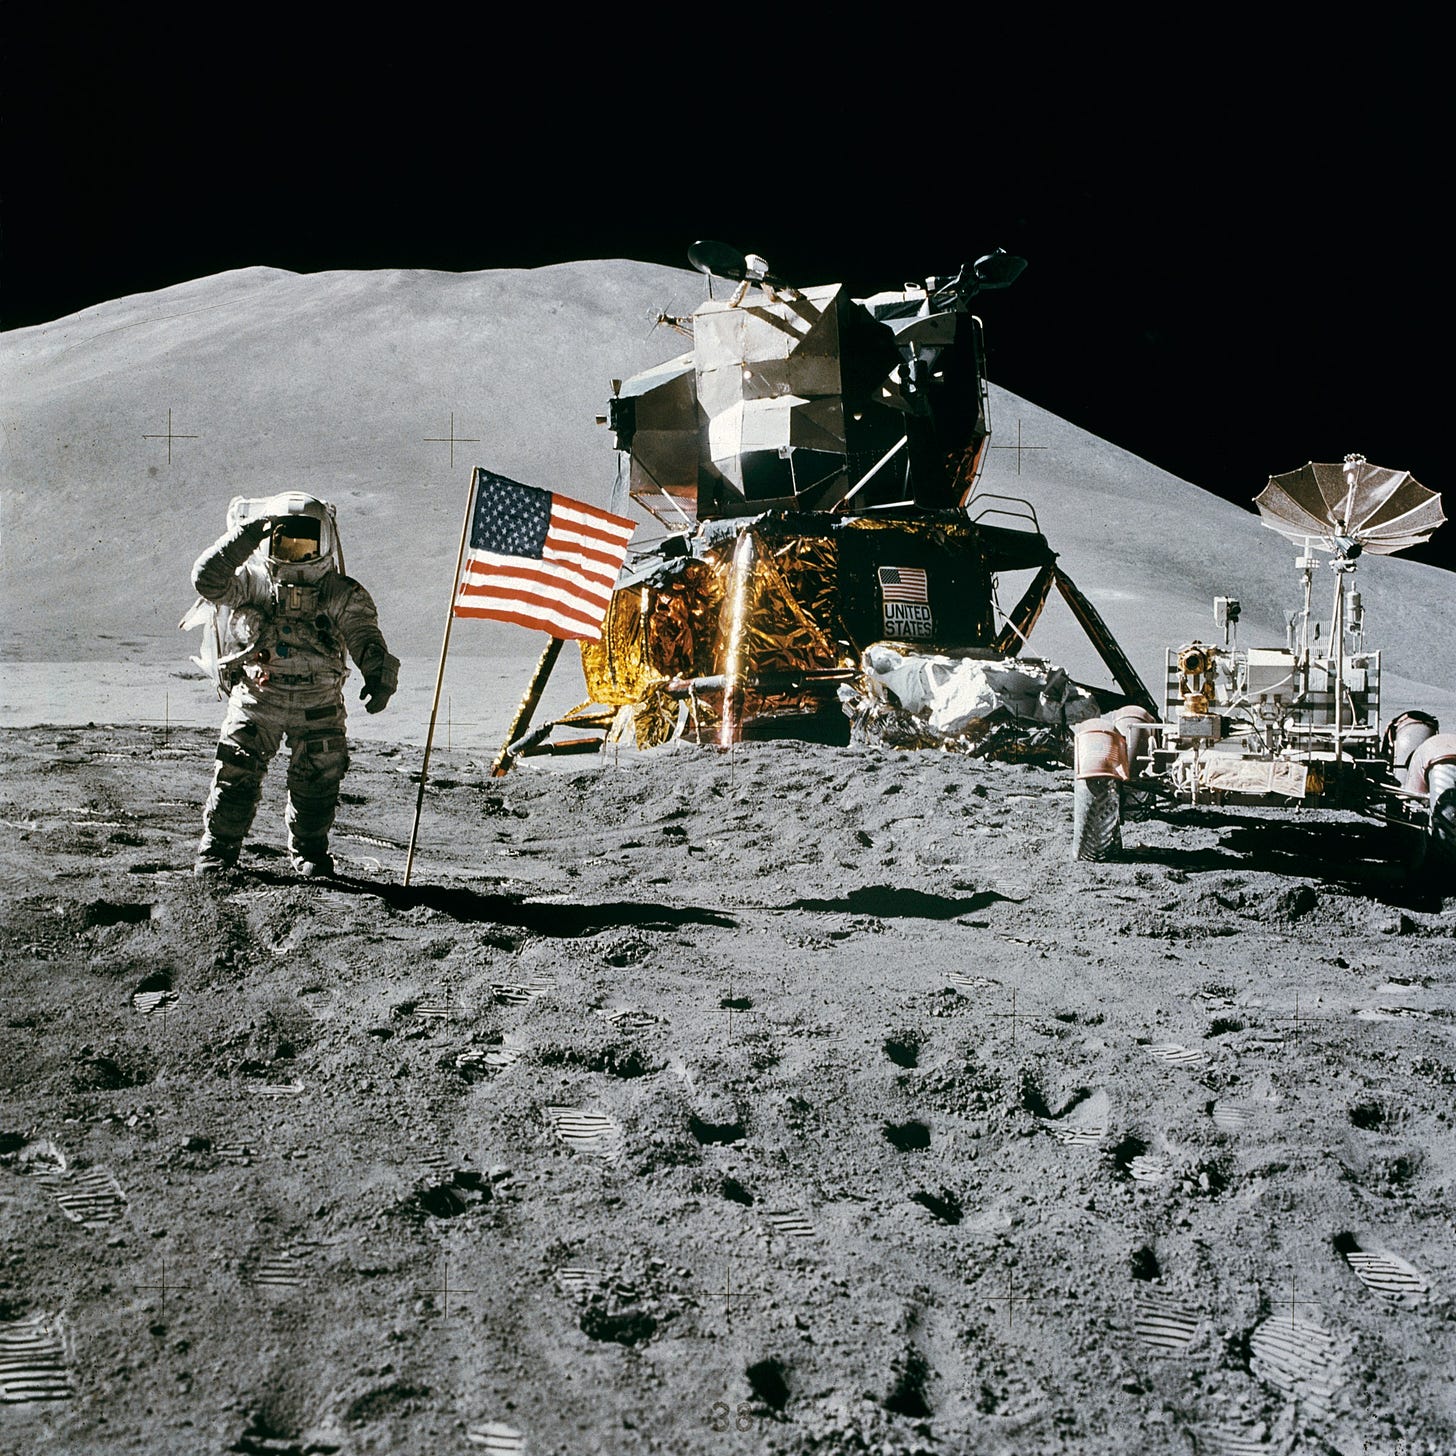 NASA description: Astronaut James B. Irwin, lunar module pilot, gives a military salute while standing beside the deployed U.S. flag during the Apollo 15 lunar surface extravehicular activity (EVA) at the Hadley-Apennine landing site. The flag was deployed toward the end of EVA-2. The Lunar Module (LM) "Falcon" is in the center. On the right is the Lunar Roving Vehicle (LRV). This view is looking almost due south. Hadley Delta in the background rises approximately 4,000 meters (about 13,124 feet) above the plain. The base of the mountain is approximately 5 kilometers (about 3 statute miles) away. This photograph was taken by Astronaut David R. Scott, Apollo 15 commander.